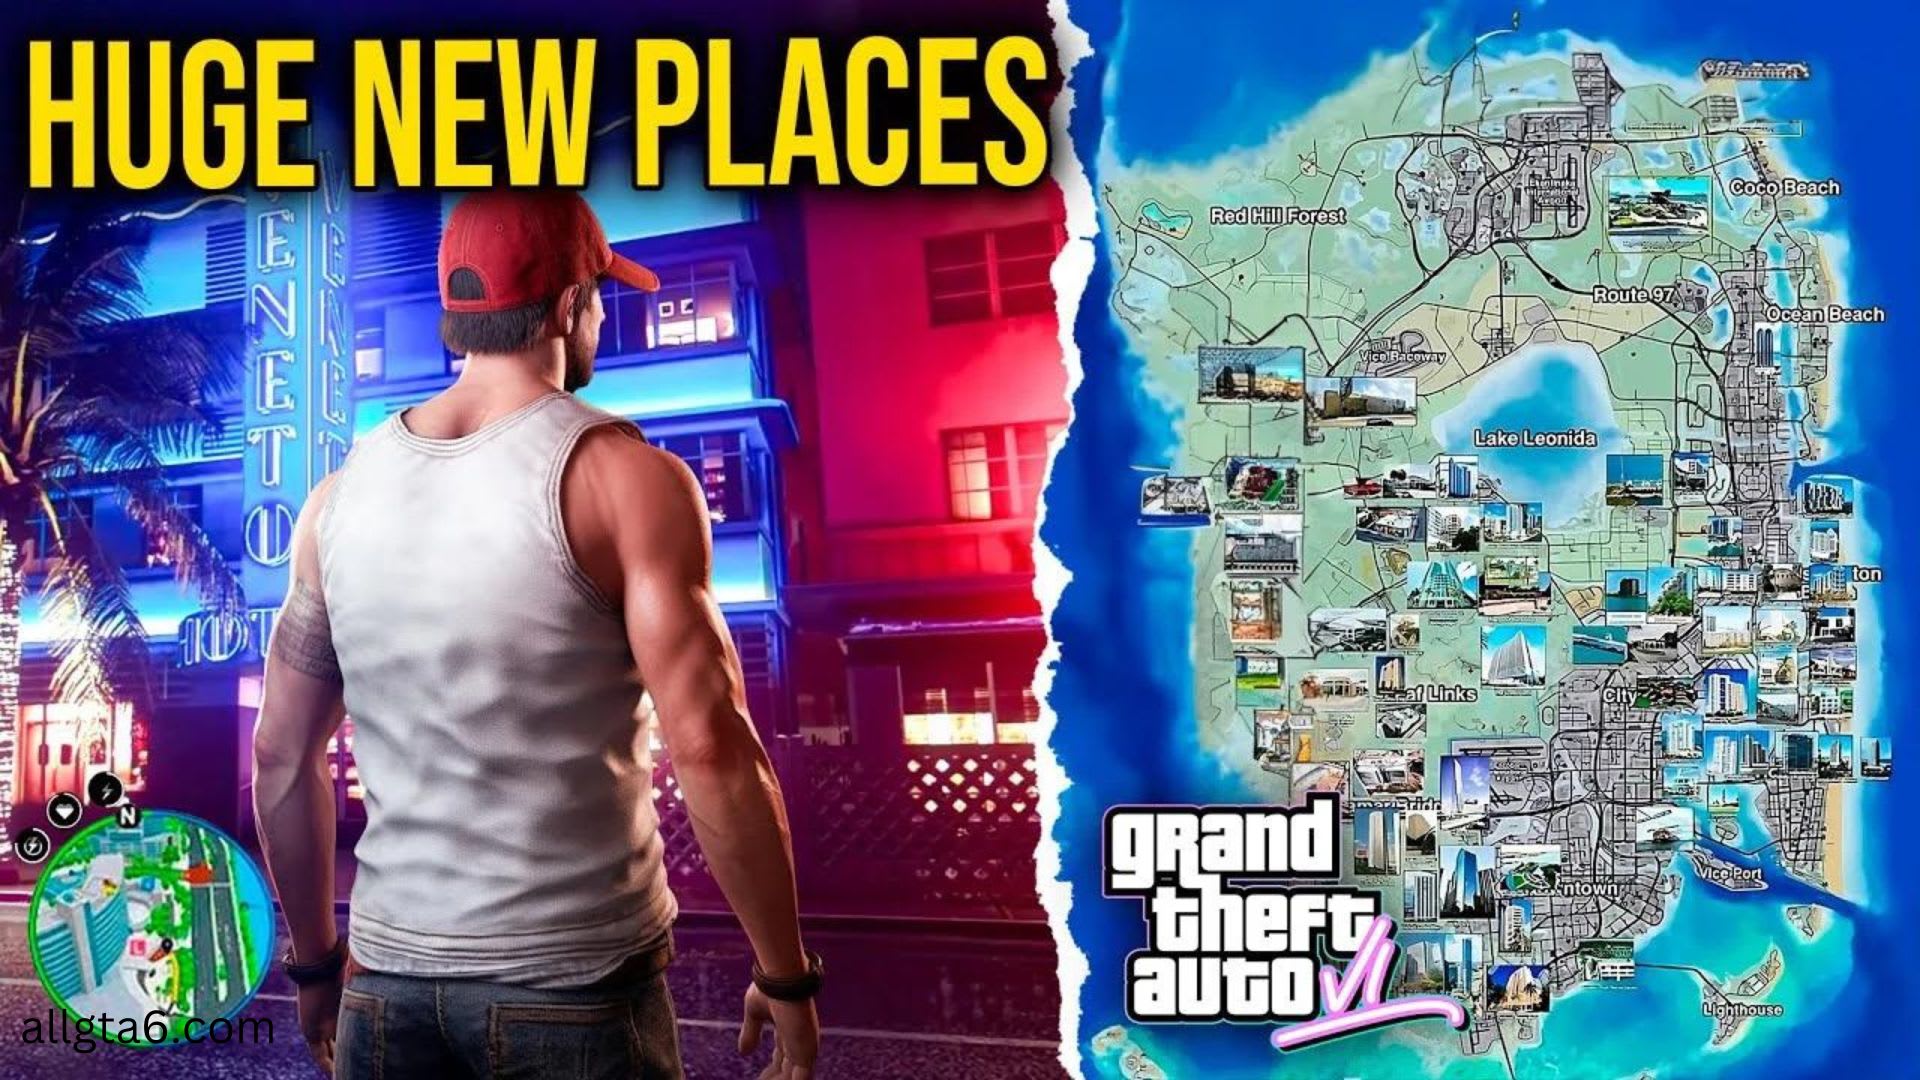 gta 6: GTA 6 leaked map: 3 things to look forward to from Rockstar's  much-awaited open world game - The Economic Times